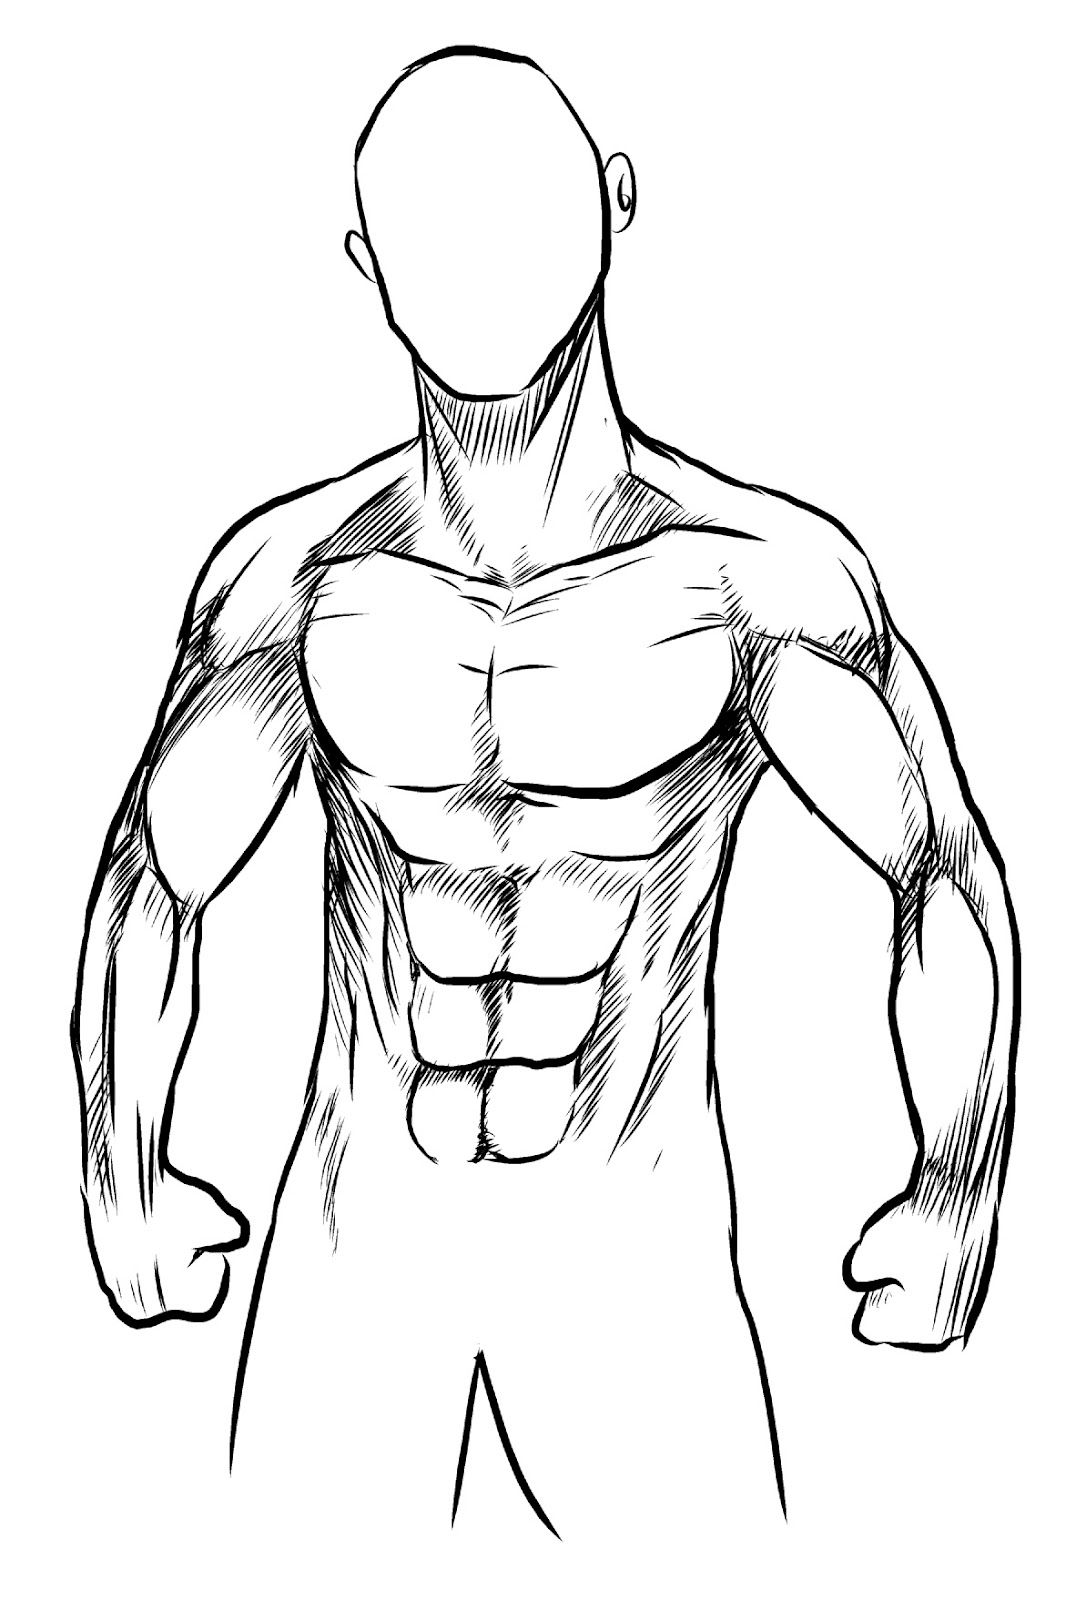 Easy Human Body Sketch Drawing with Realistic